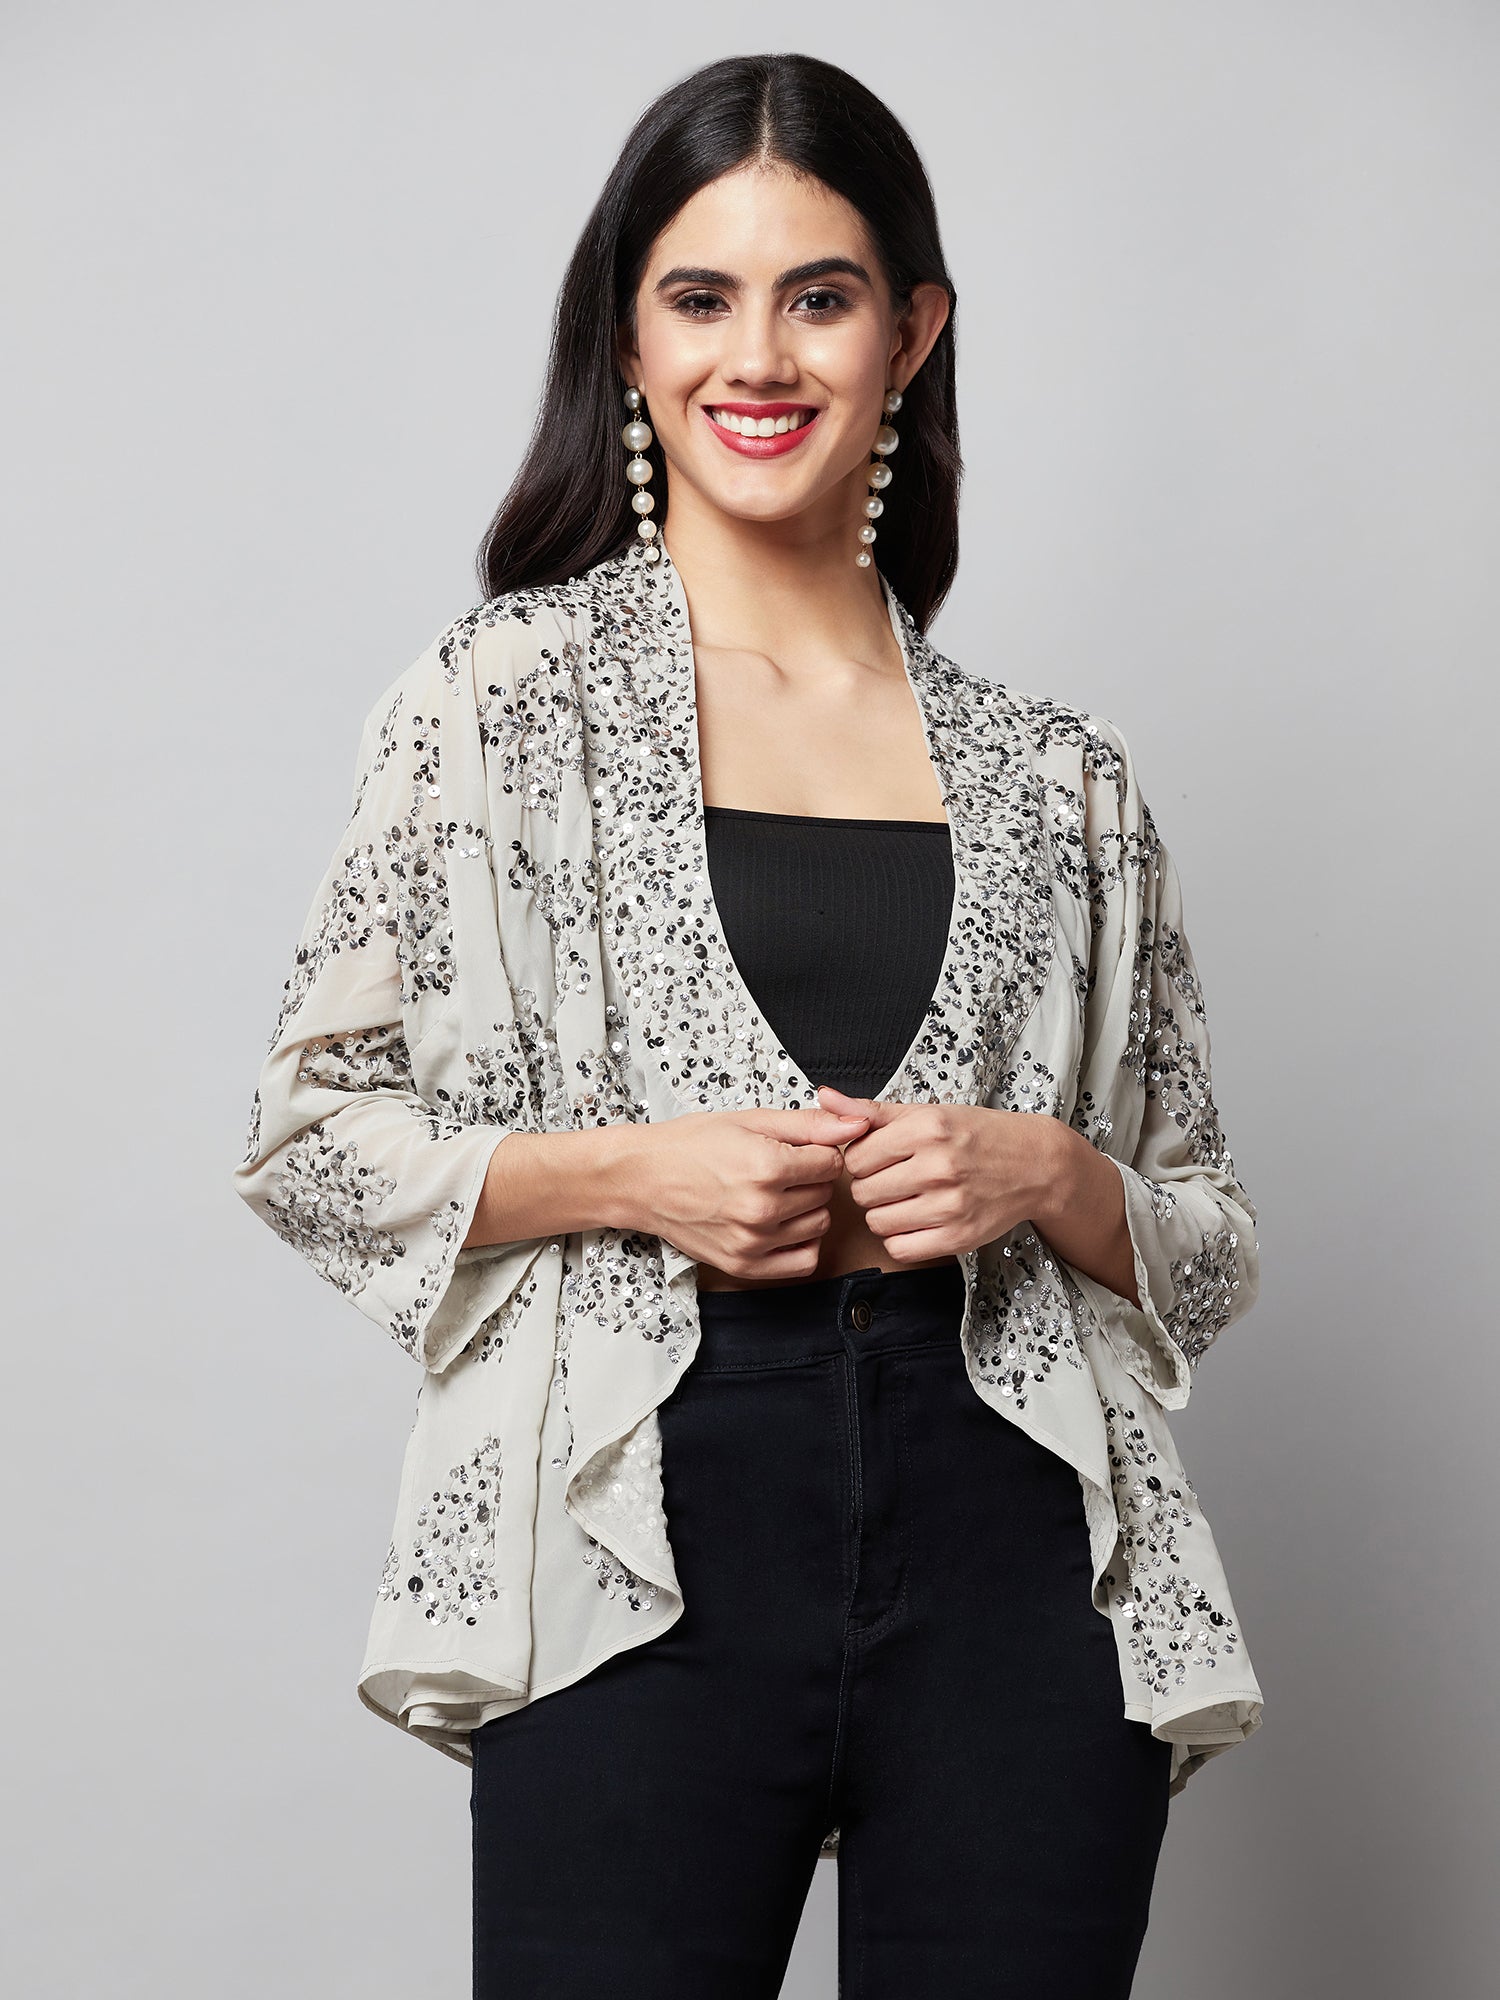 attic curves pale grey shrug with sequin work